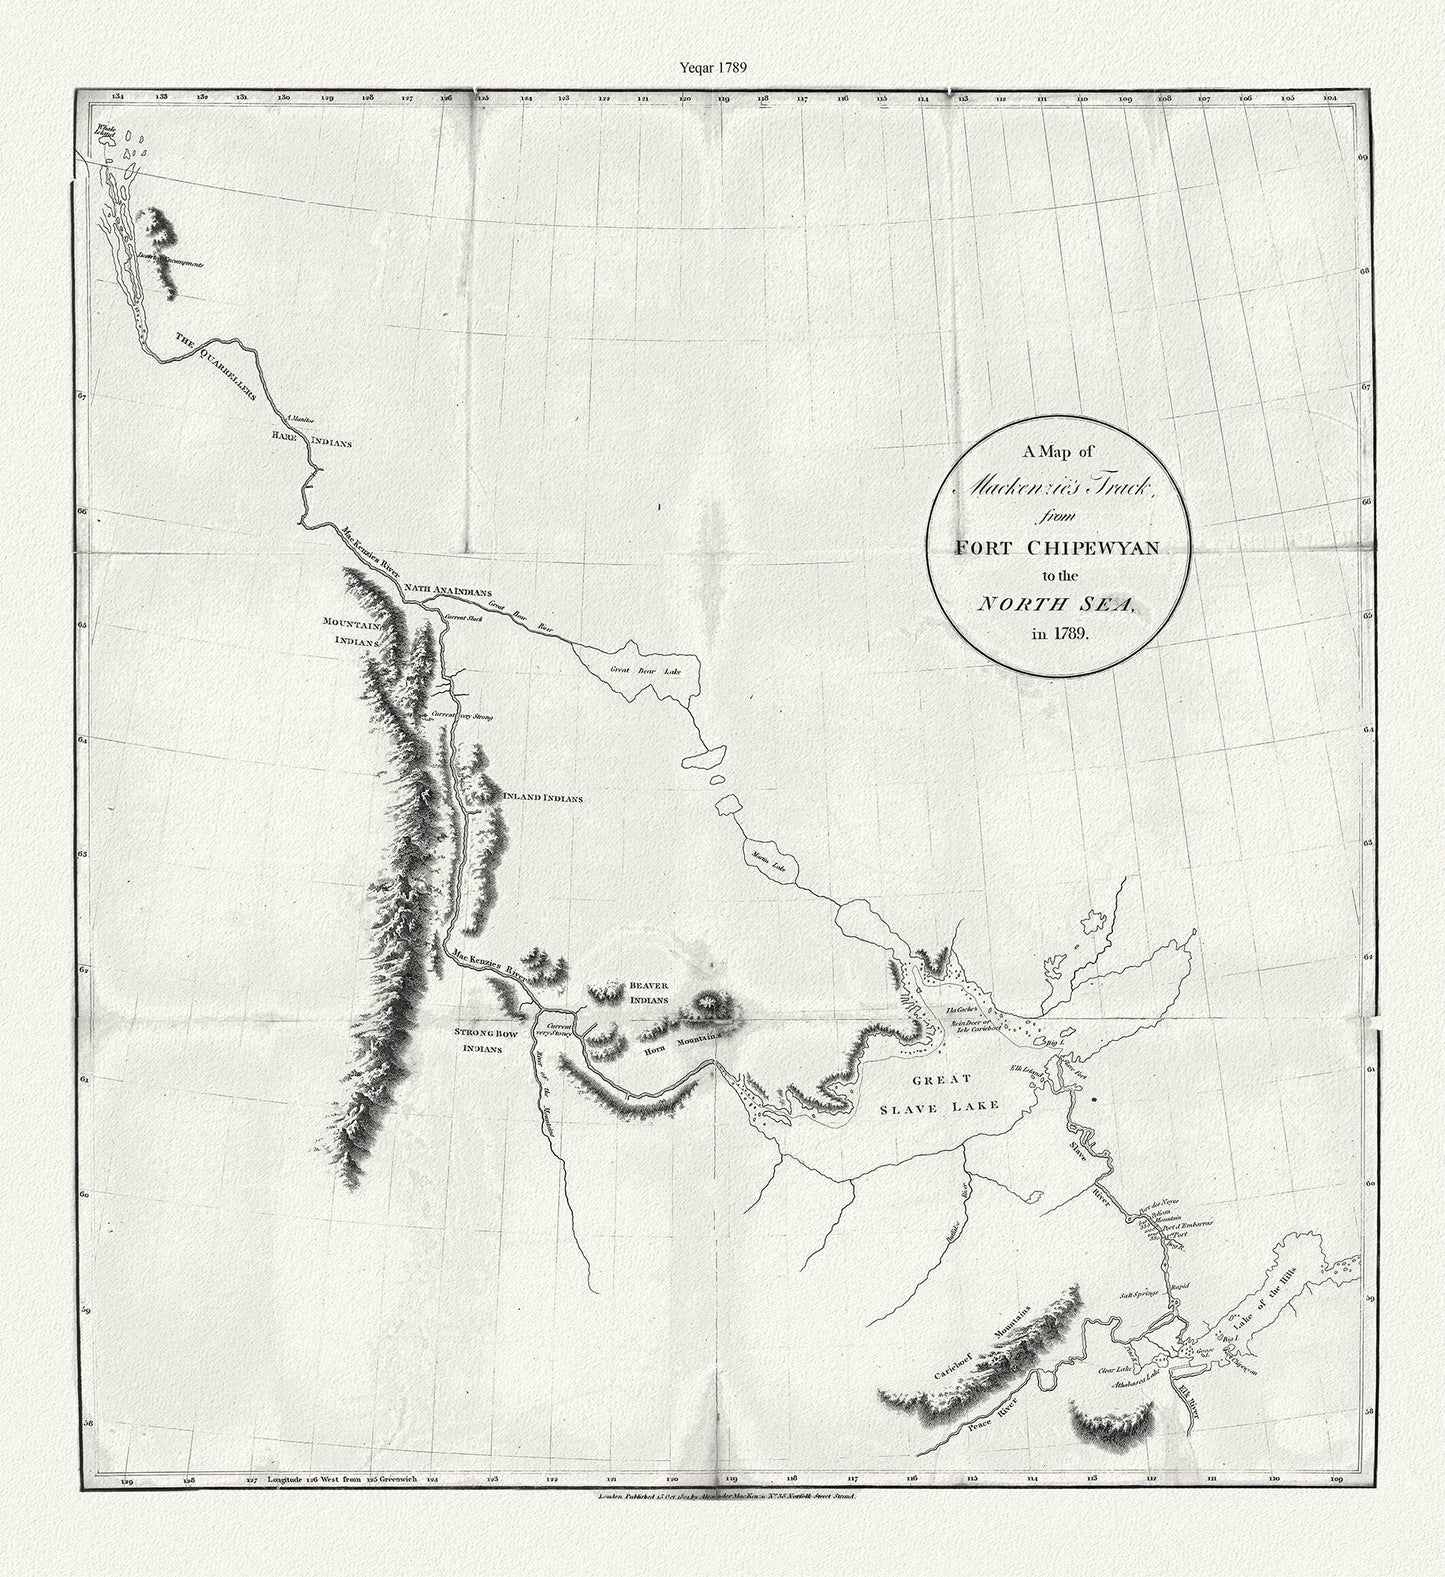 A map of Mackenzie's track from Fort Chipewyan to the north sea in 1789, canvas, 50 x 70 cm or 20x25" approx.